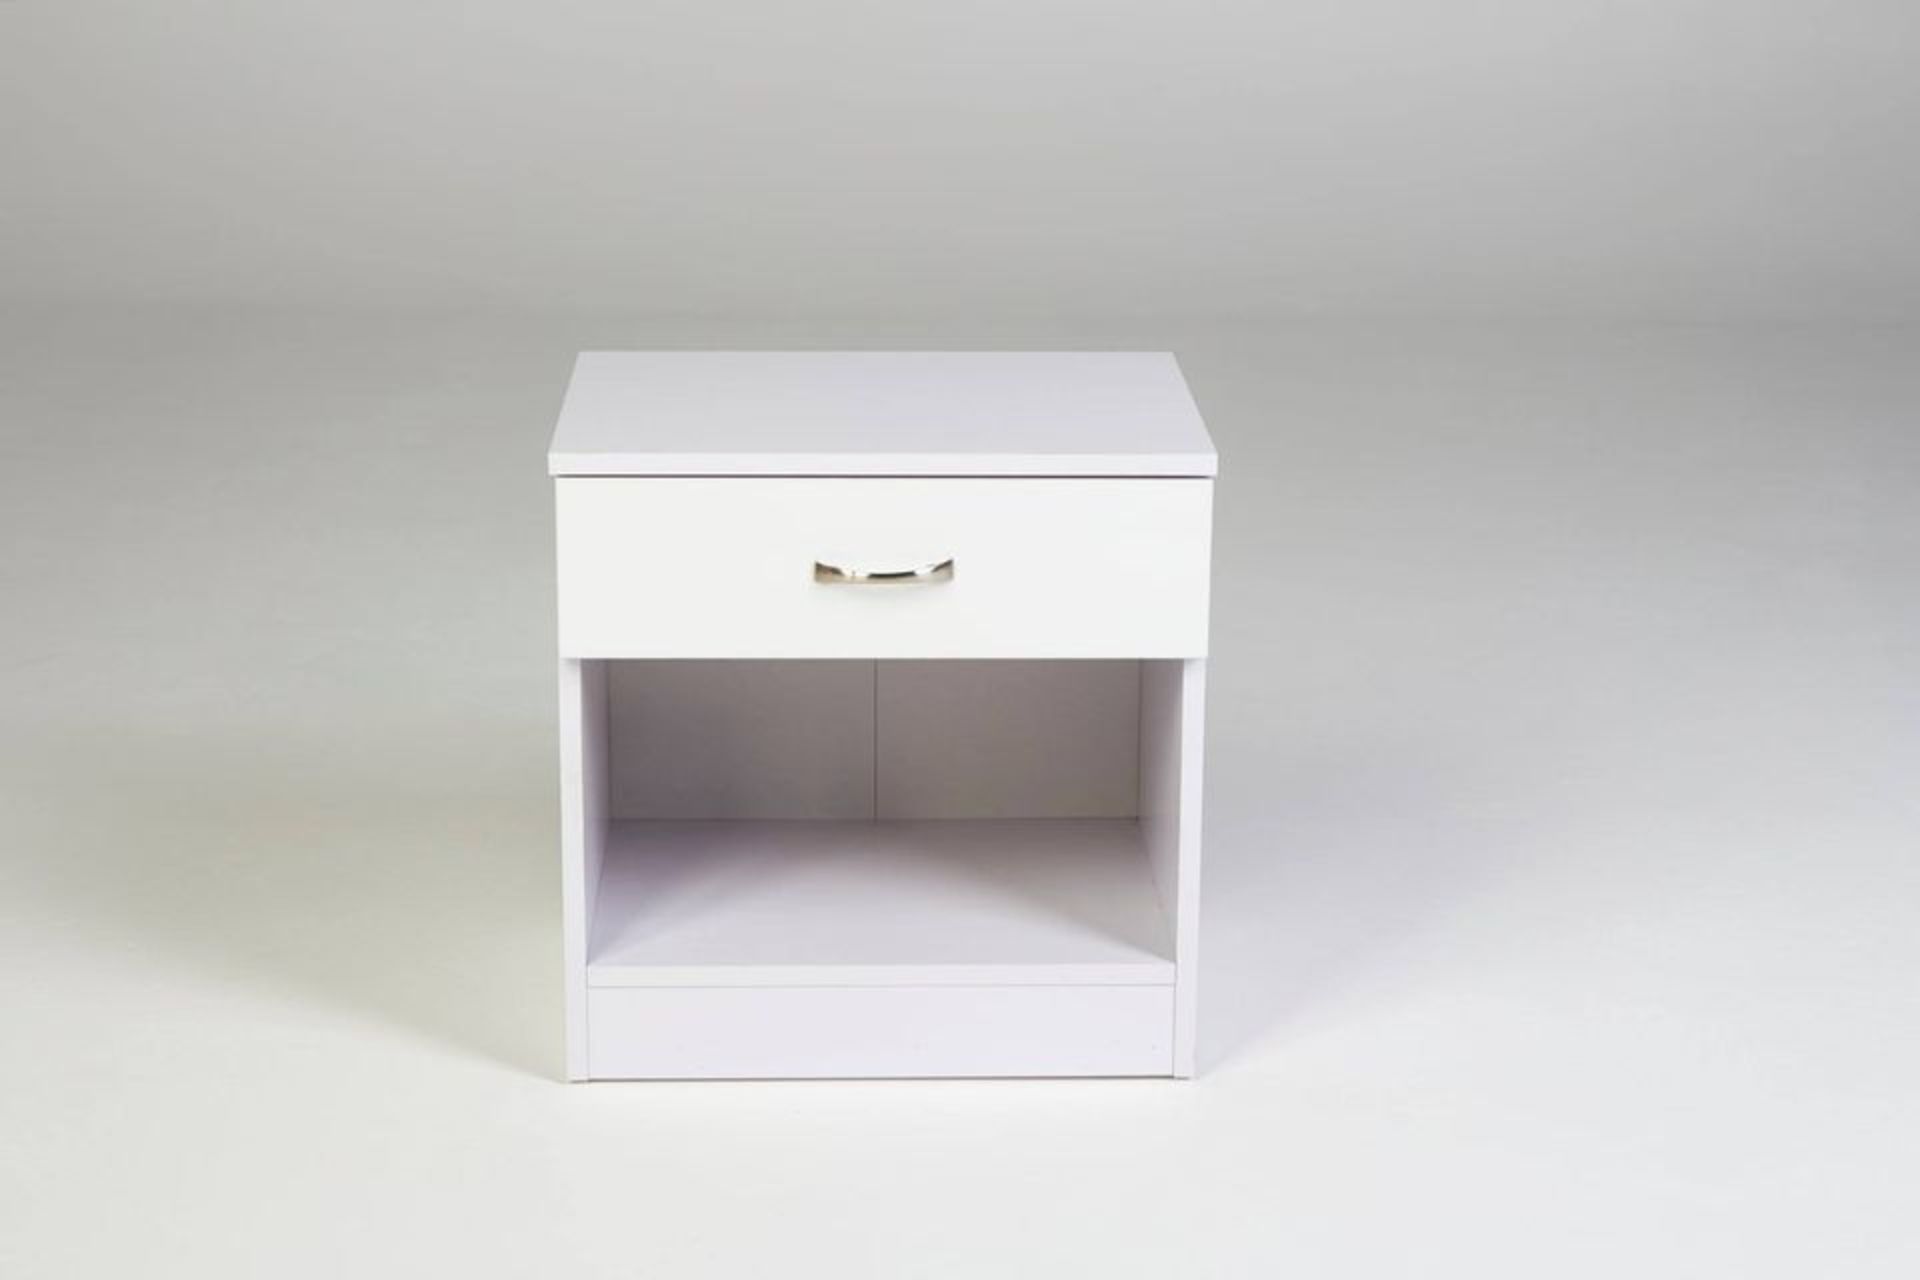 20 X WHITE SINGLE DRAWER BEDSIDES WITH HIGH GLOSS DRAWER FRONTS - Image 3 of 4